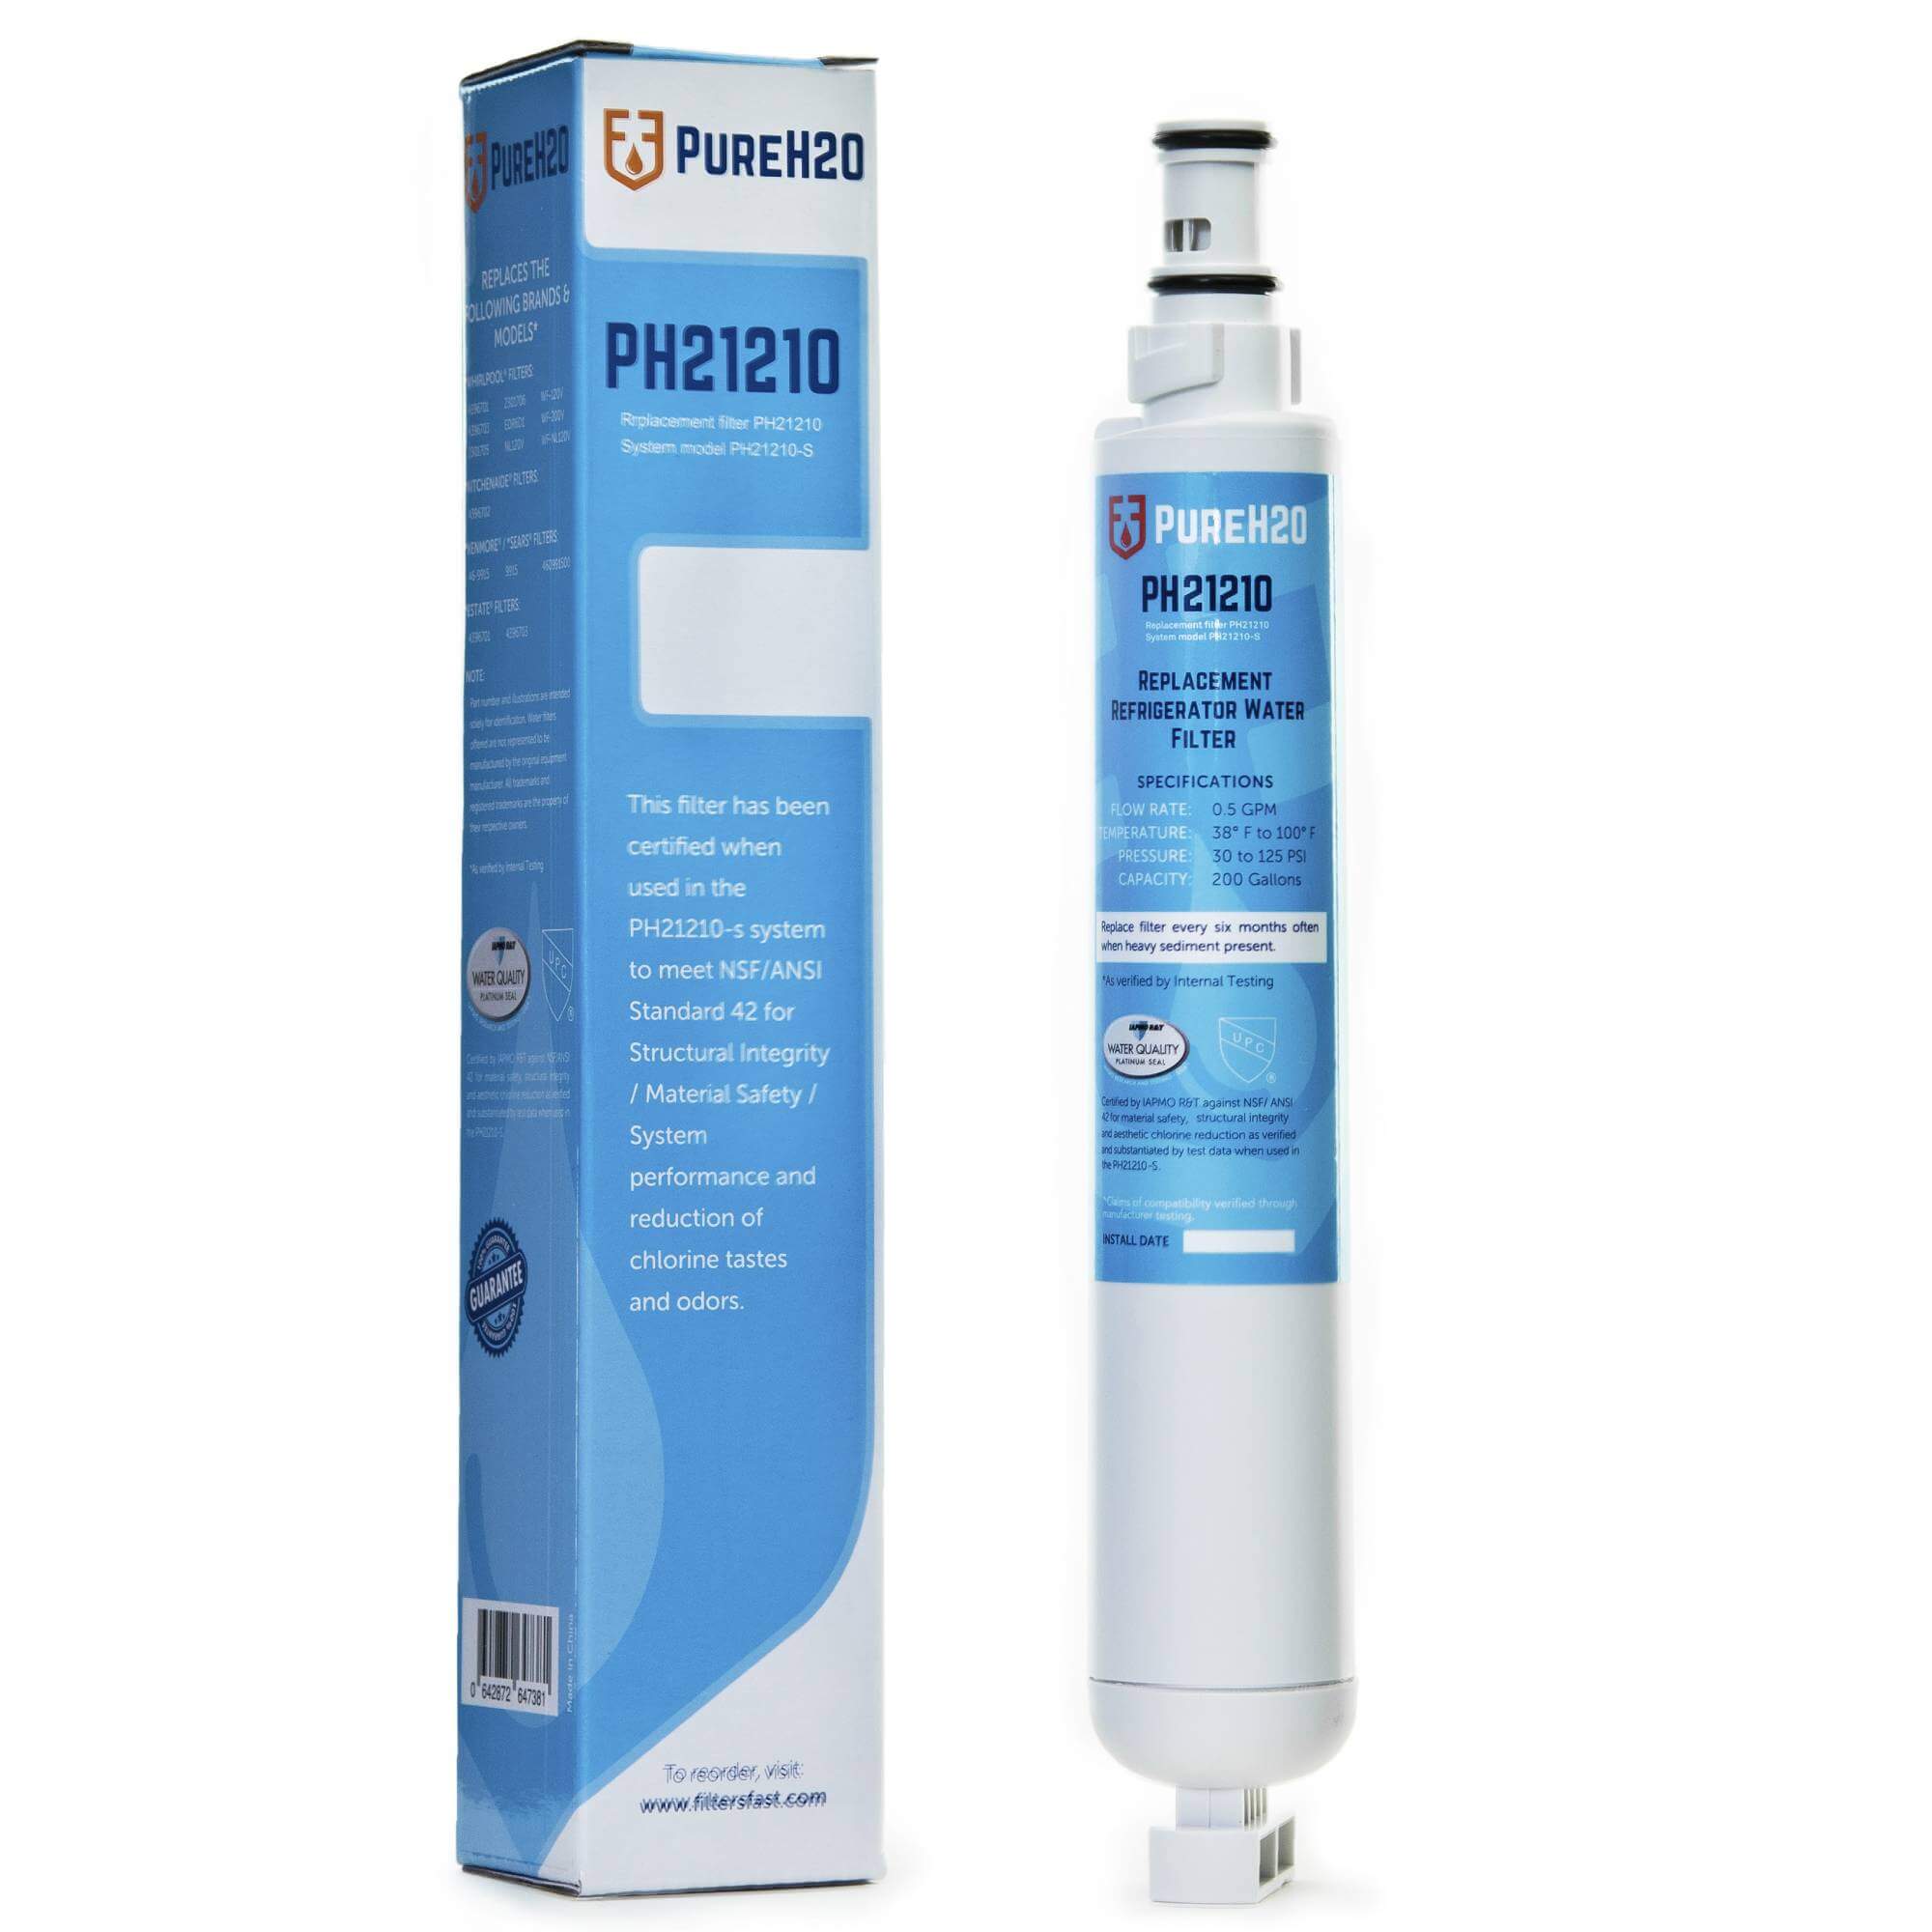 PureH2O PH21210 Replacement for everydrop EDR6D2